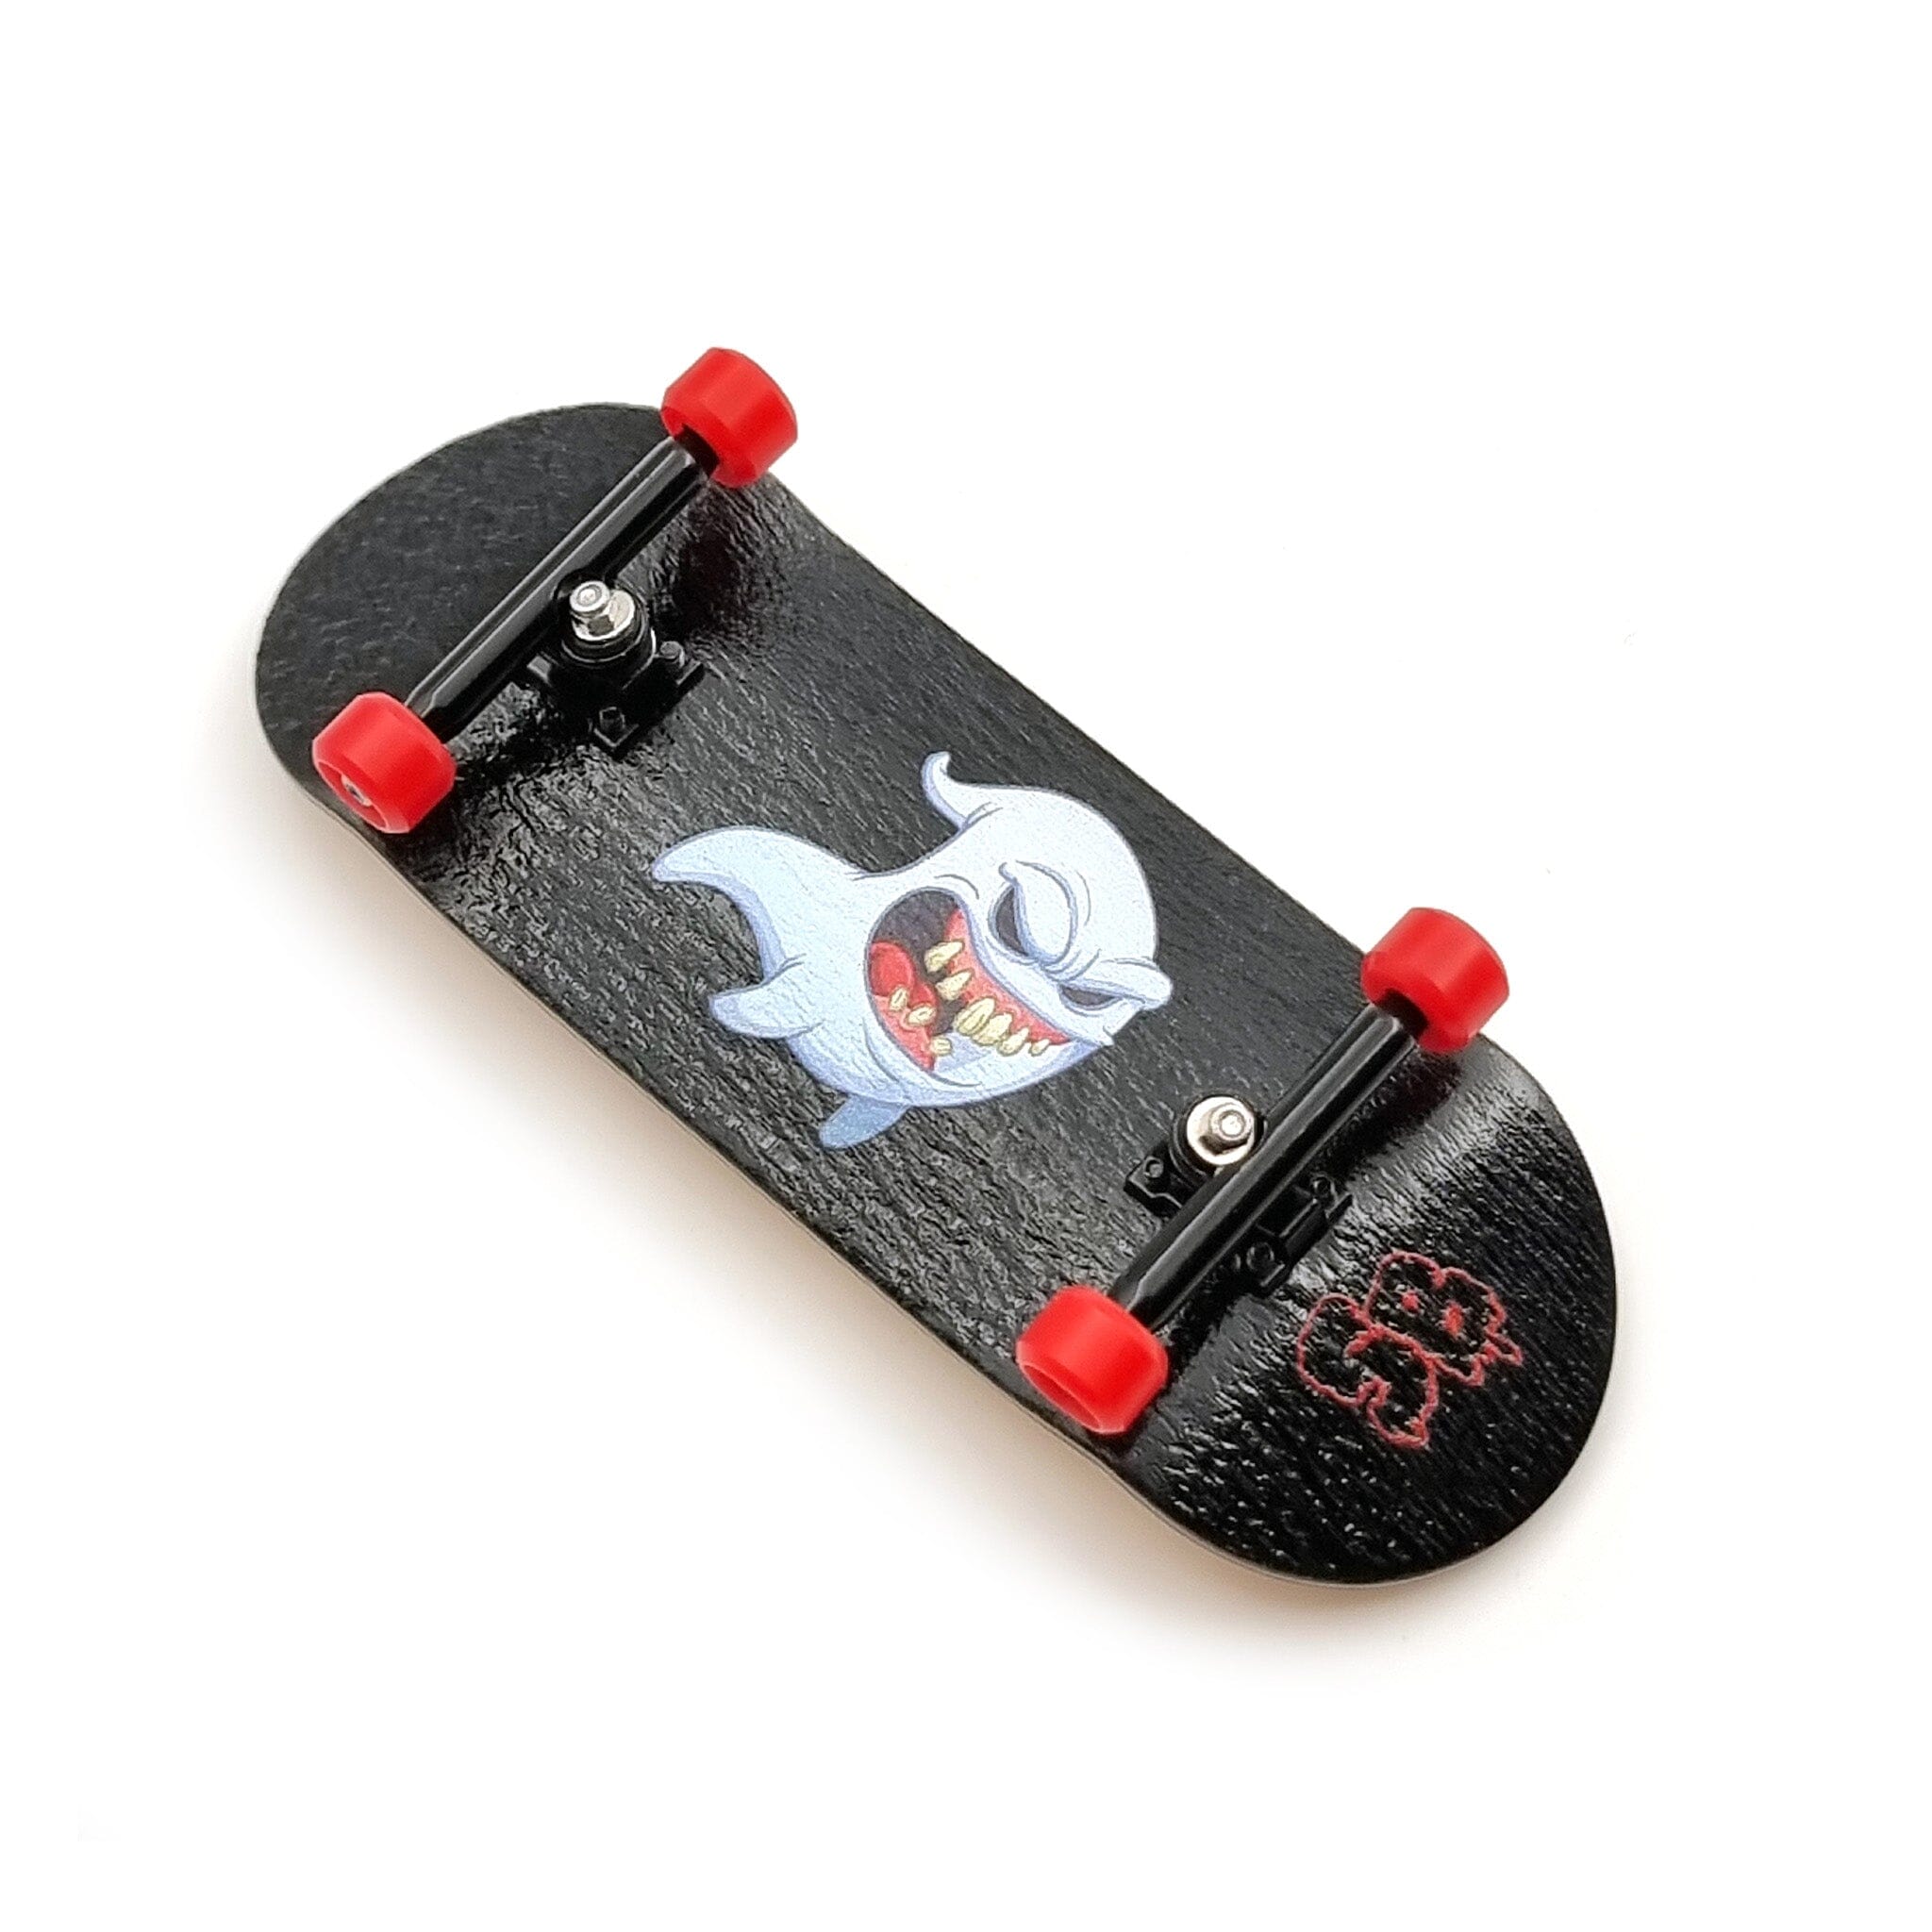 SPITBOARDS 34mm x 96mm Pro Fingerboard Set-Up (Complete) | Real Wood Deck | Pro Trucks with Lock-Nuts and Pro Bushings | Polyurethane Pro Wheels